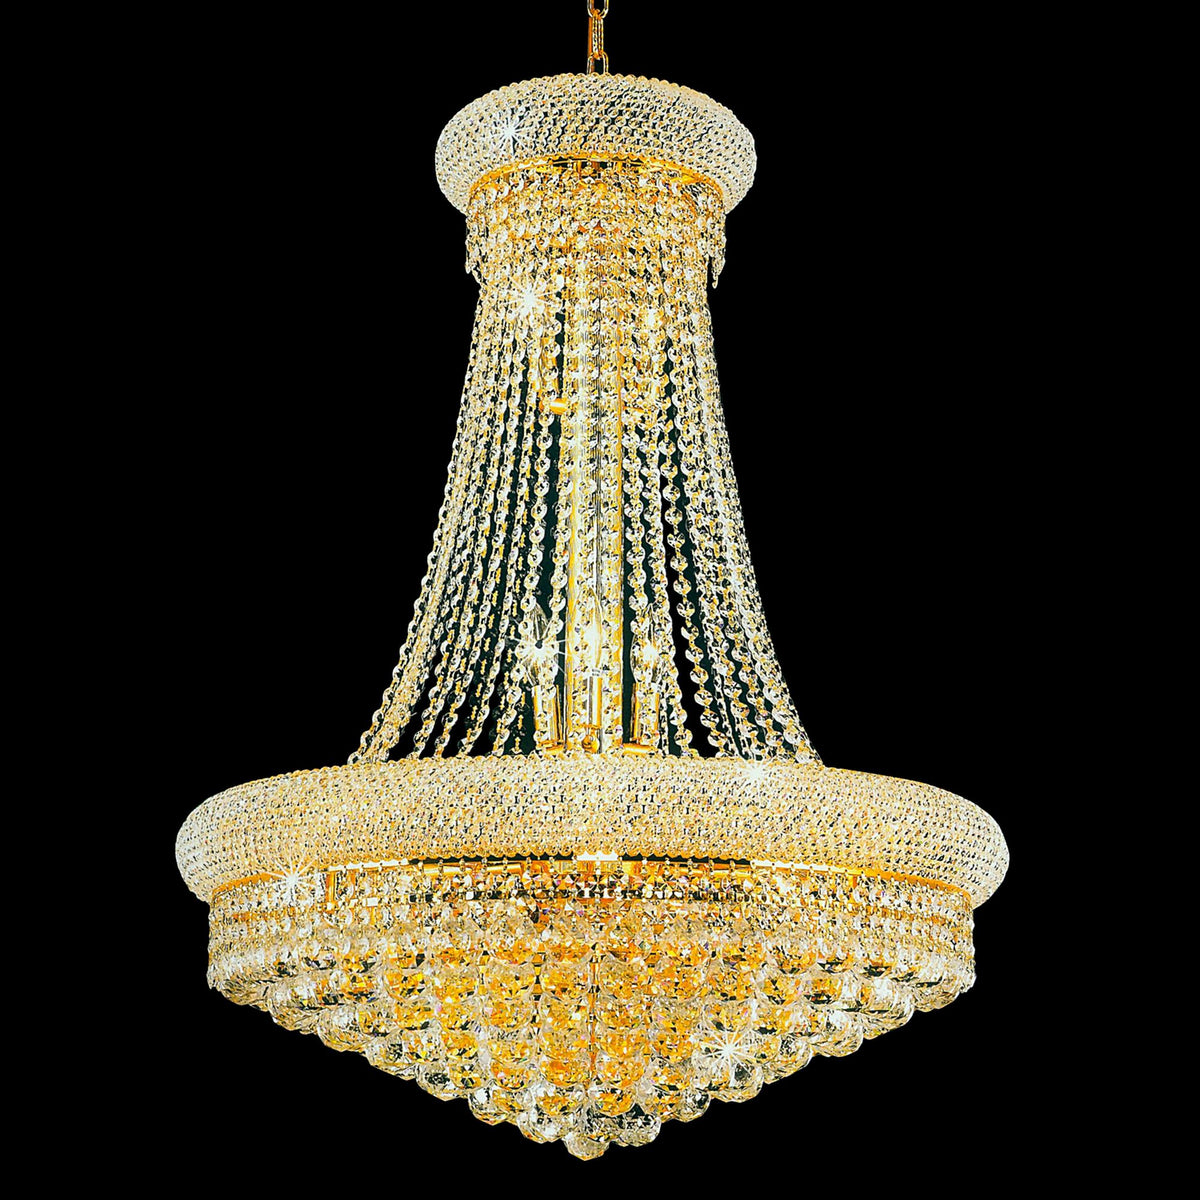 CWI Lighting 17 Light Chandelier from the Empire collection in Gold finish